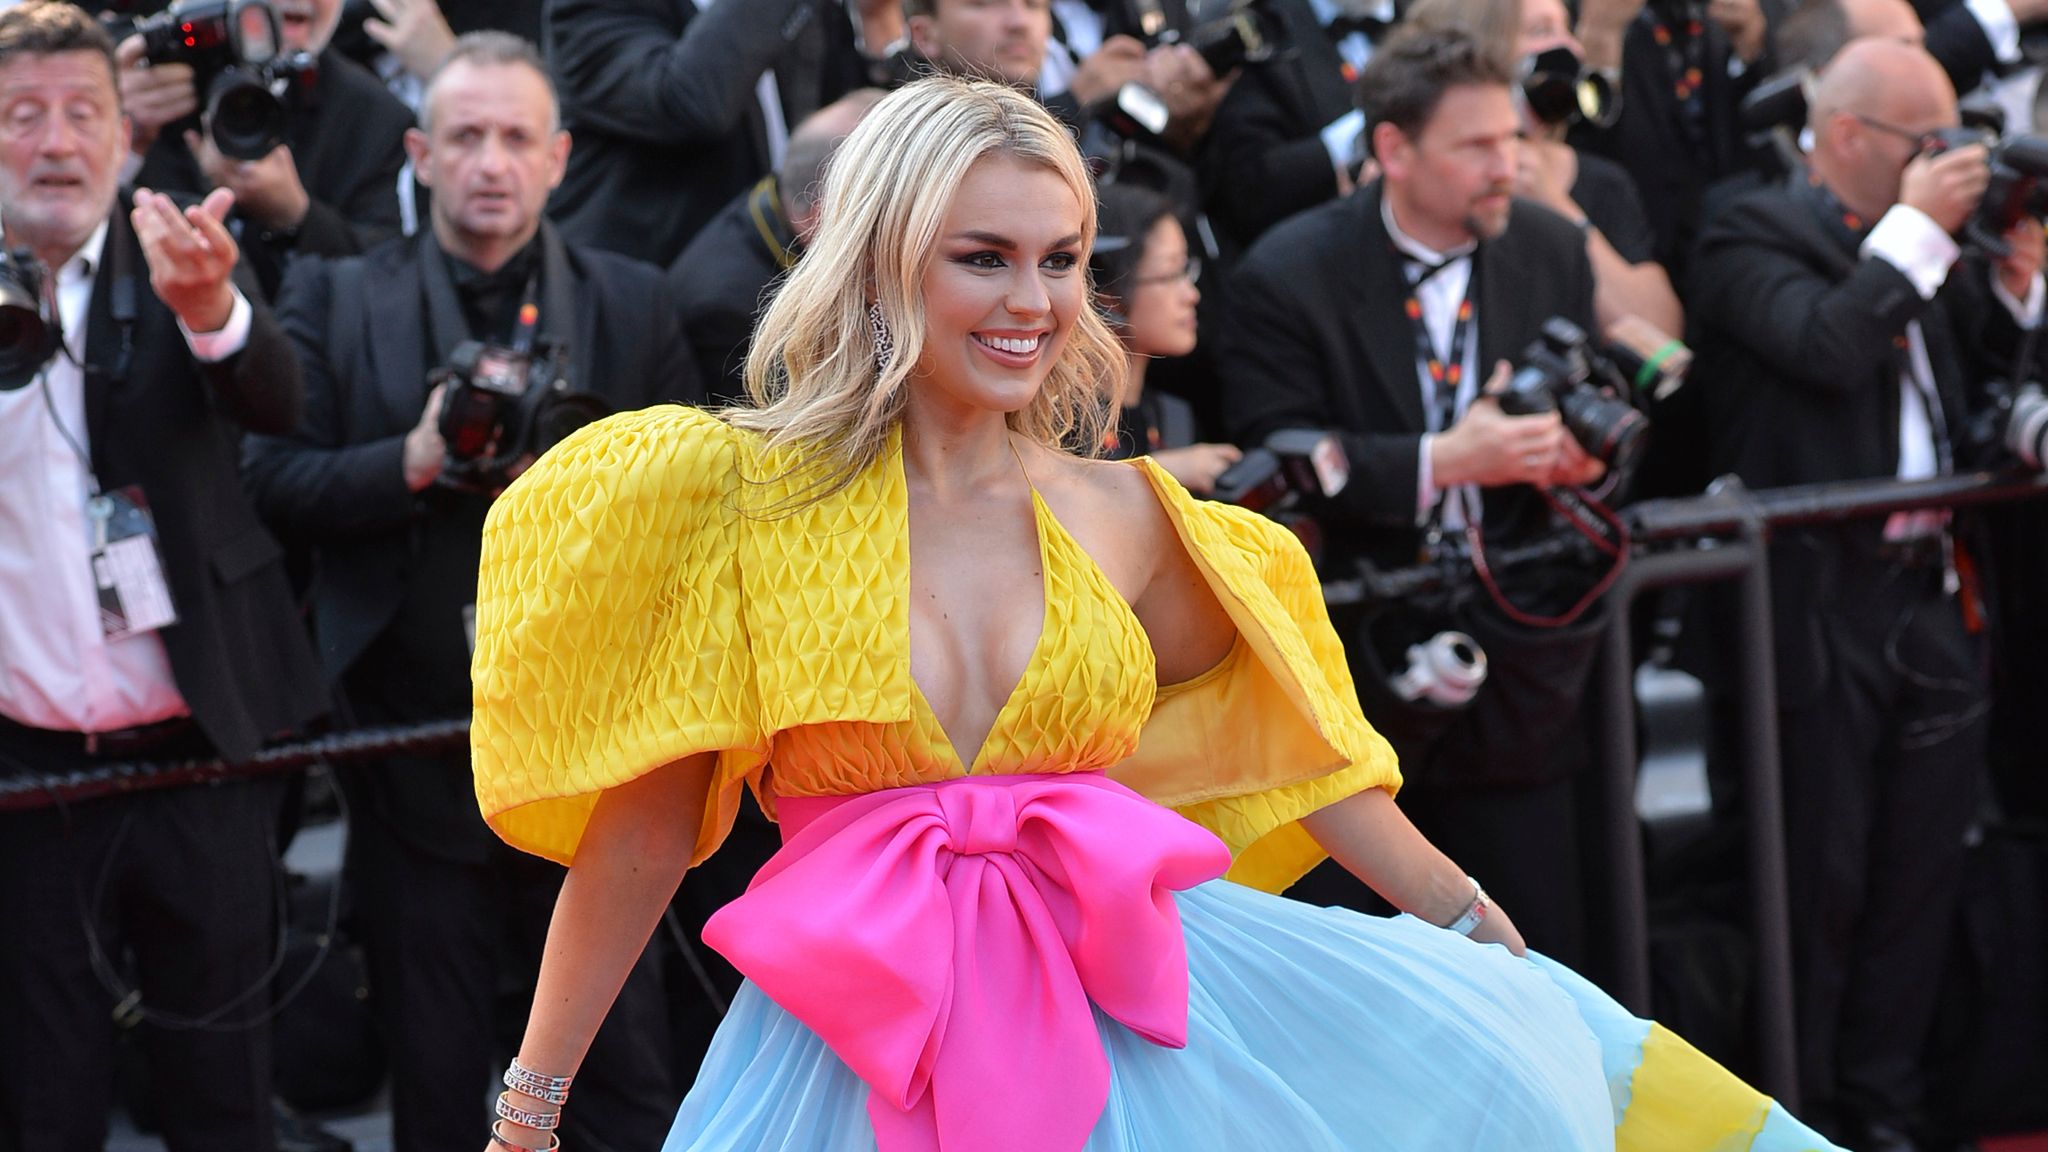 17 May 2022, France, Cannes: The singer Tallia Storm attends the screening of "Final Cut" (original title: "Coupez!") and the Opening Ceremony Red Carpet during the 75th Annual Cannes Film Festival at Palais des Festivals. Photo by: Stefanie Rex/picture-alliance/dpa/AP Images